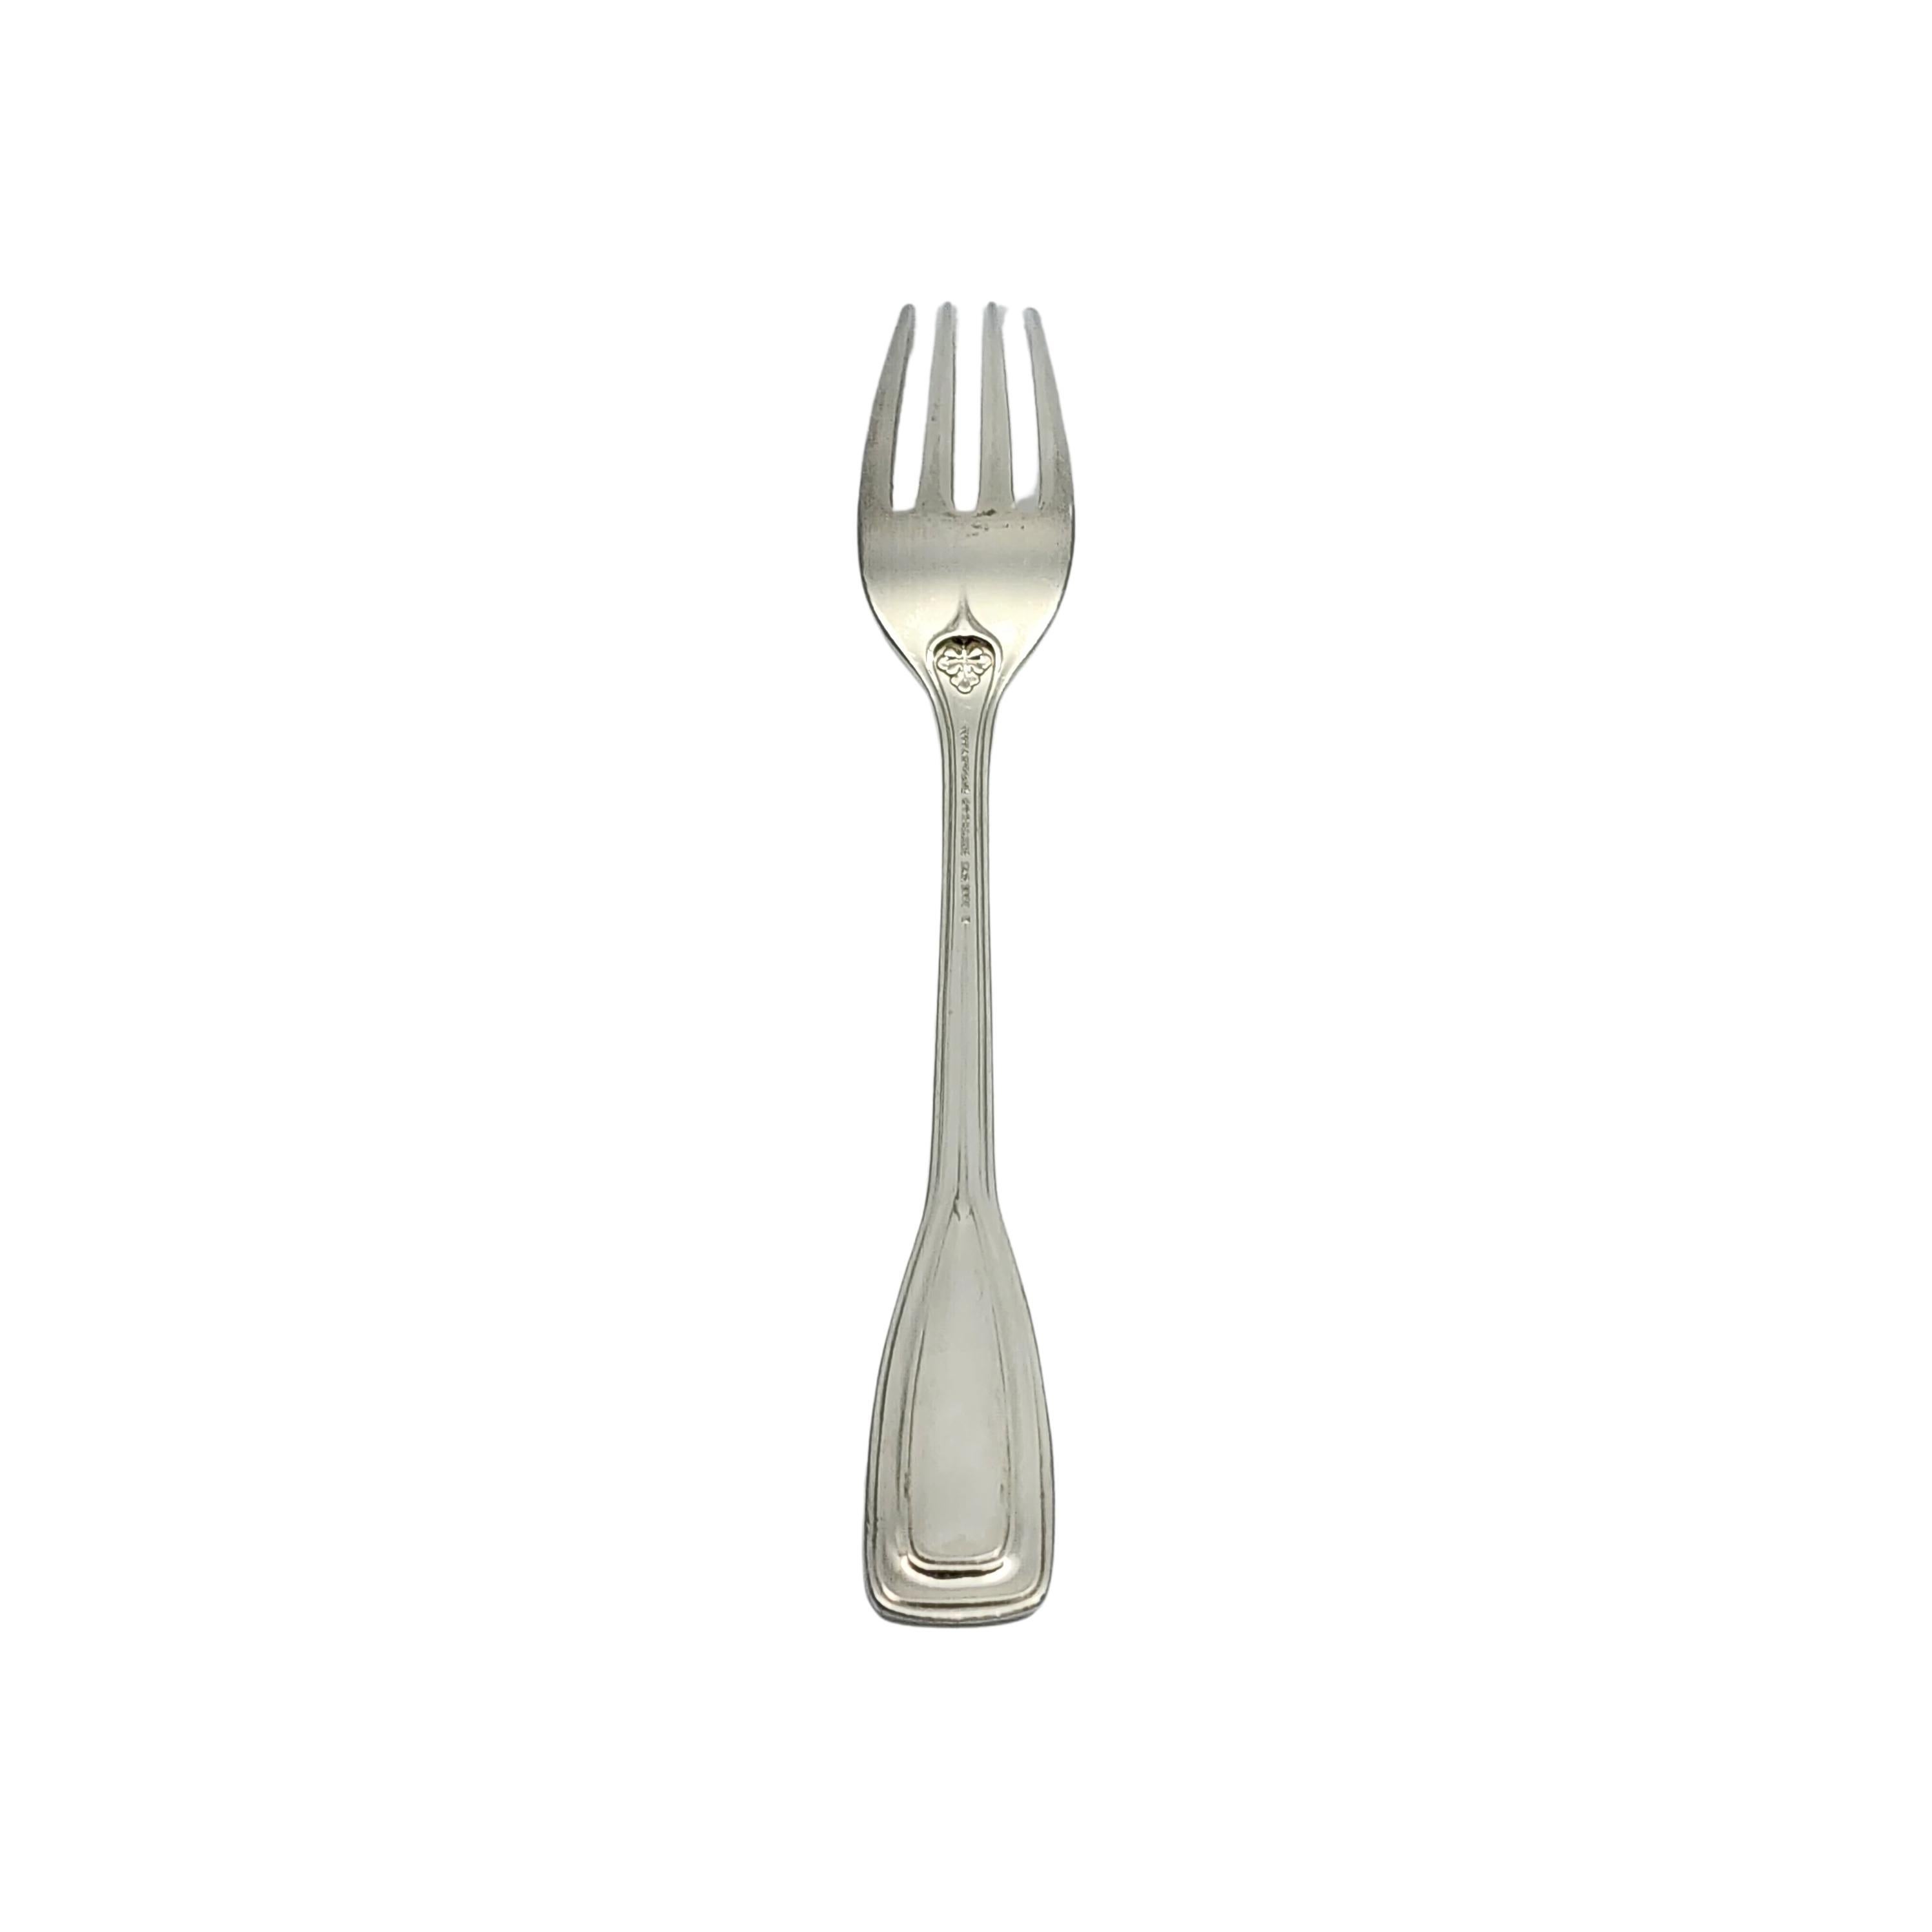 Sterling silver fork by Tiffany & Co in the St. Dunstan pattern with monogram.

Monogram appears to be W

Designed by Albert A. Southwick in 1909 and named for the patron saint of gold and silversmiths, Tiffany's St. Dunstan pattern is a classic Art